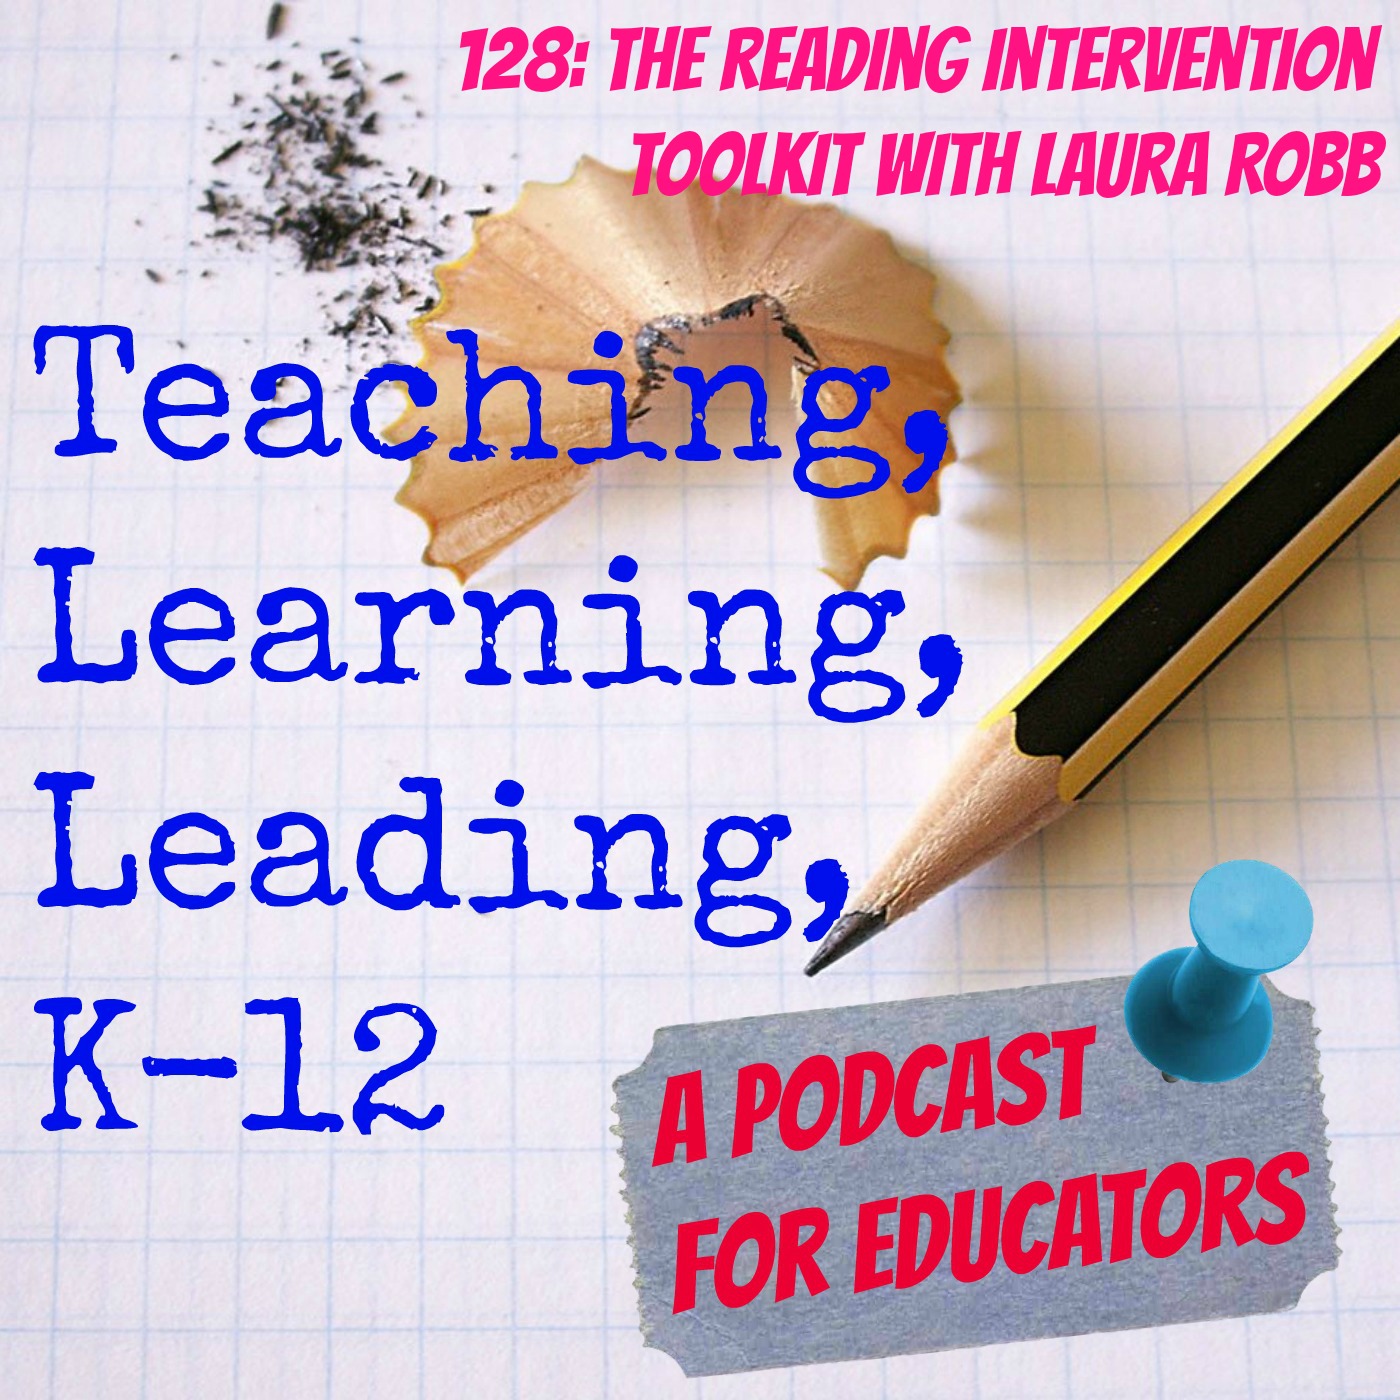 128: The Reading Intervention Toolkit with author Laura Robb